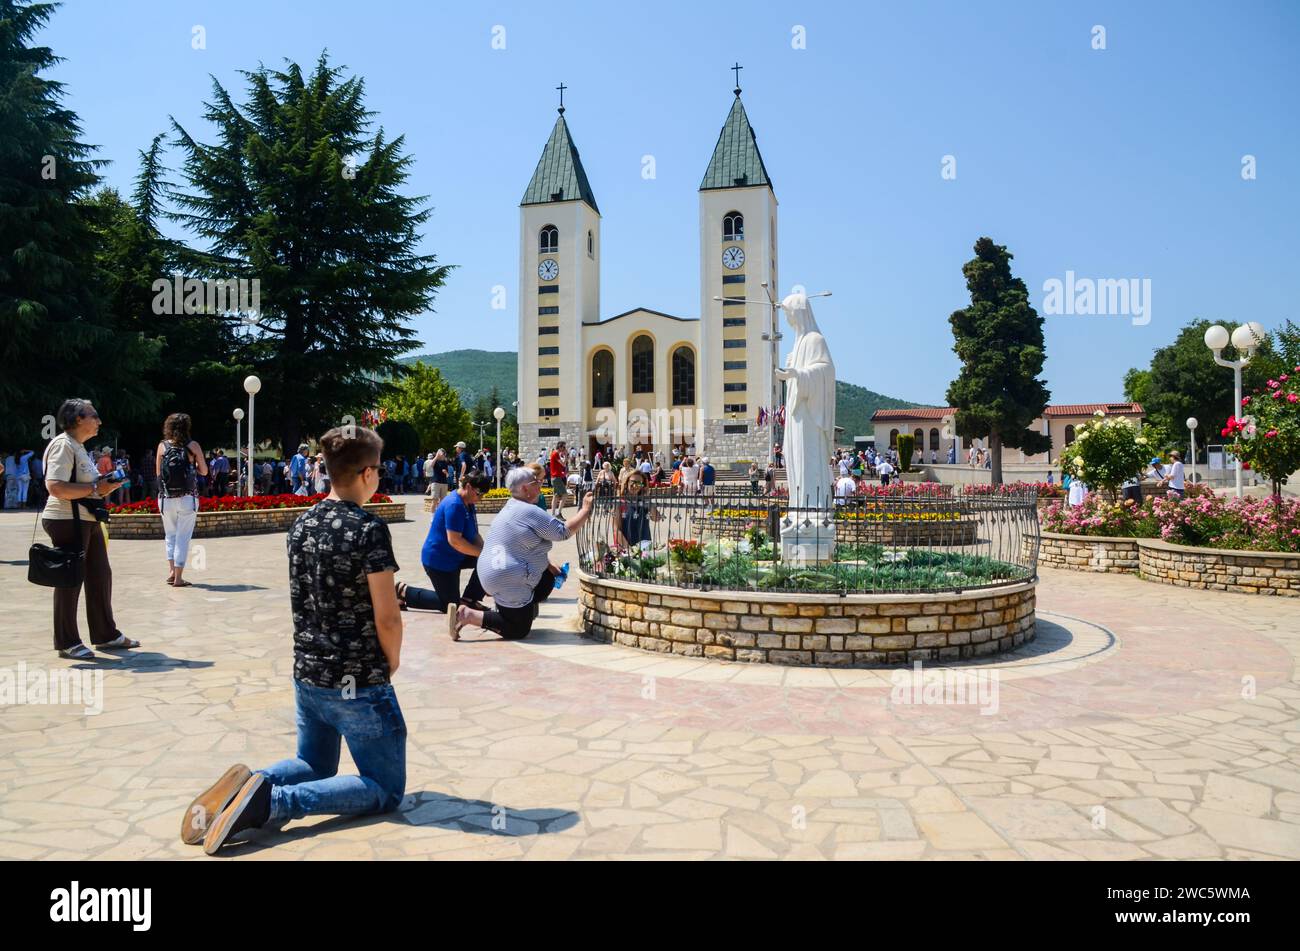 Međugorje, Bosnia and Herzegovina. Catholic pilgrims praying in Medjugorje. People attending a holy mass. Church and statue of Virgin Mary Stock Photo